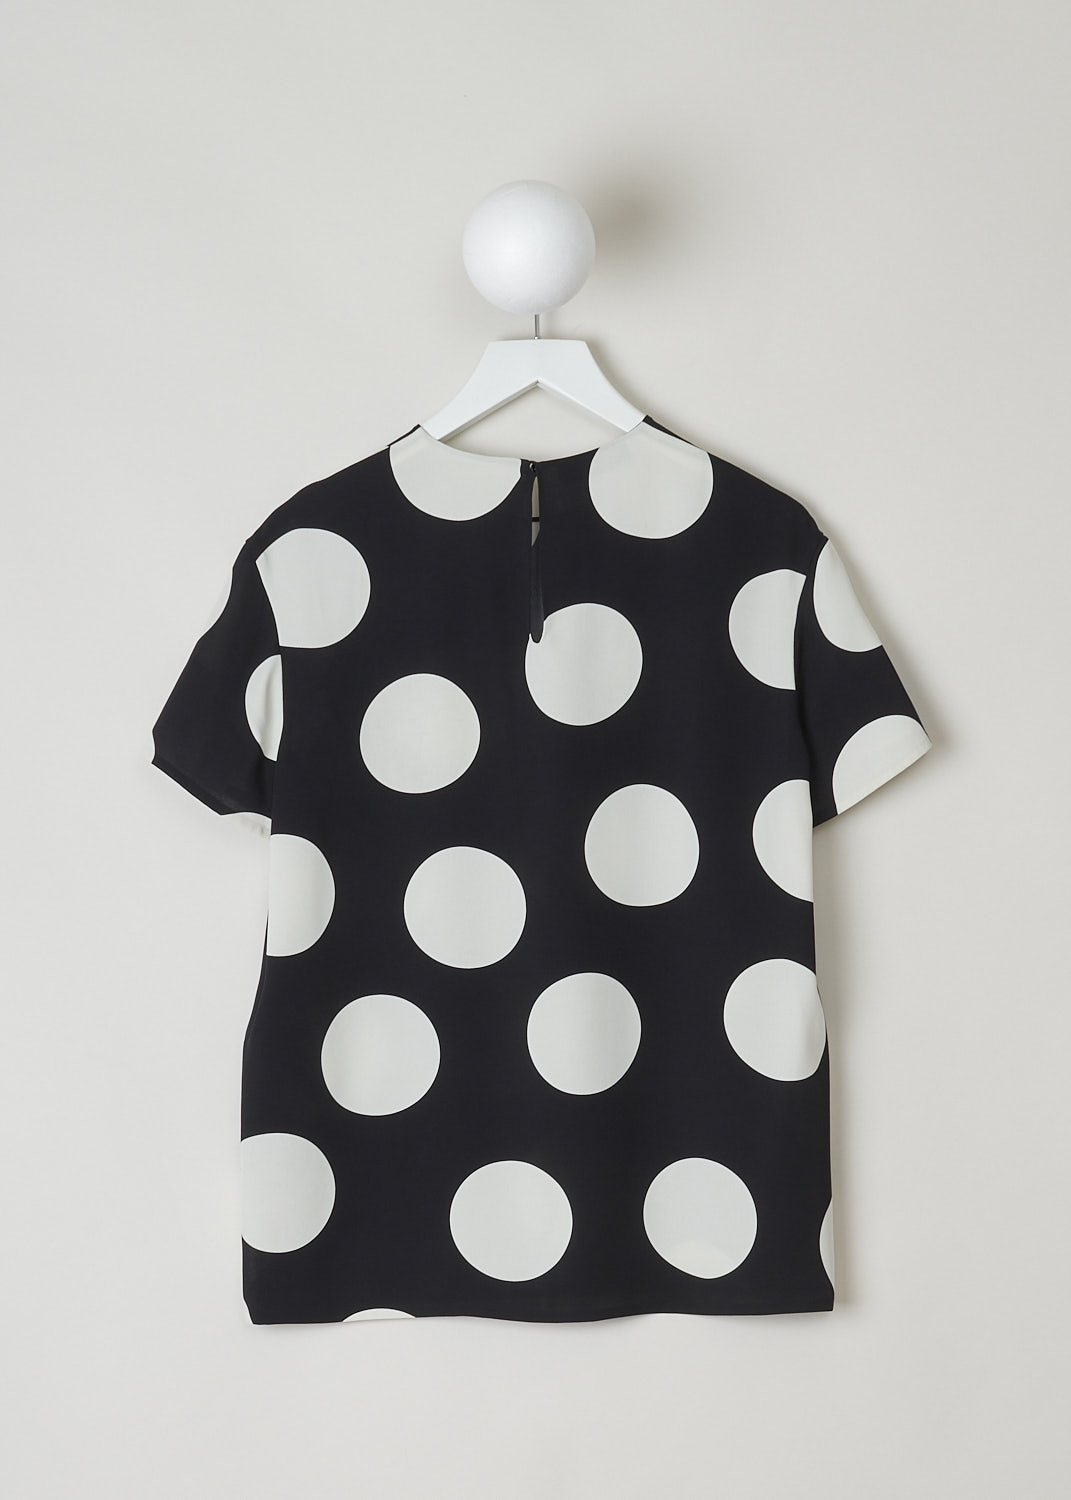 VALENTINO, BLACK TOP WITH BIG WHITE DOTS, VB3AE5P5661_0NA, Black, White, Print, Back, This boxy silk top has a black base with a big dotted print in white.  The top has a high, round neckline and short sleeves. In the back, a single button with keyhole functions as the closure option. The top has a wider silhouette.
